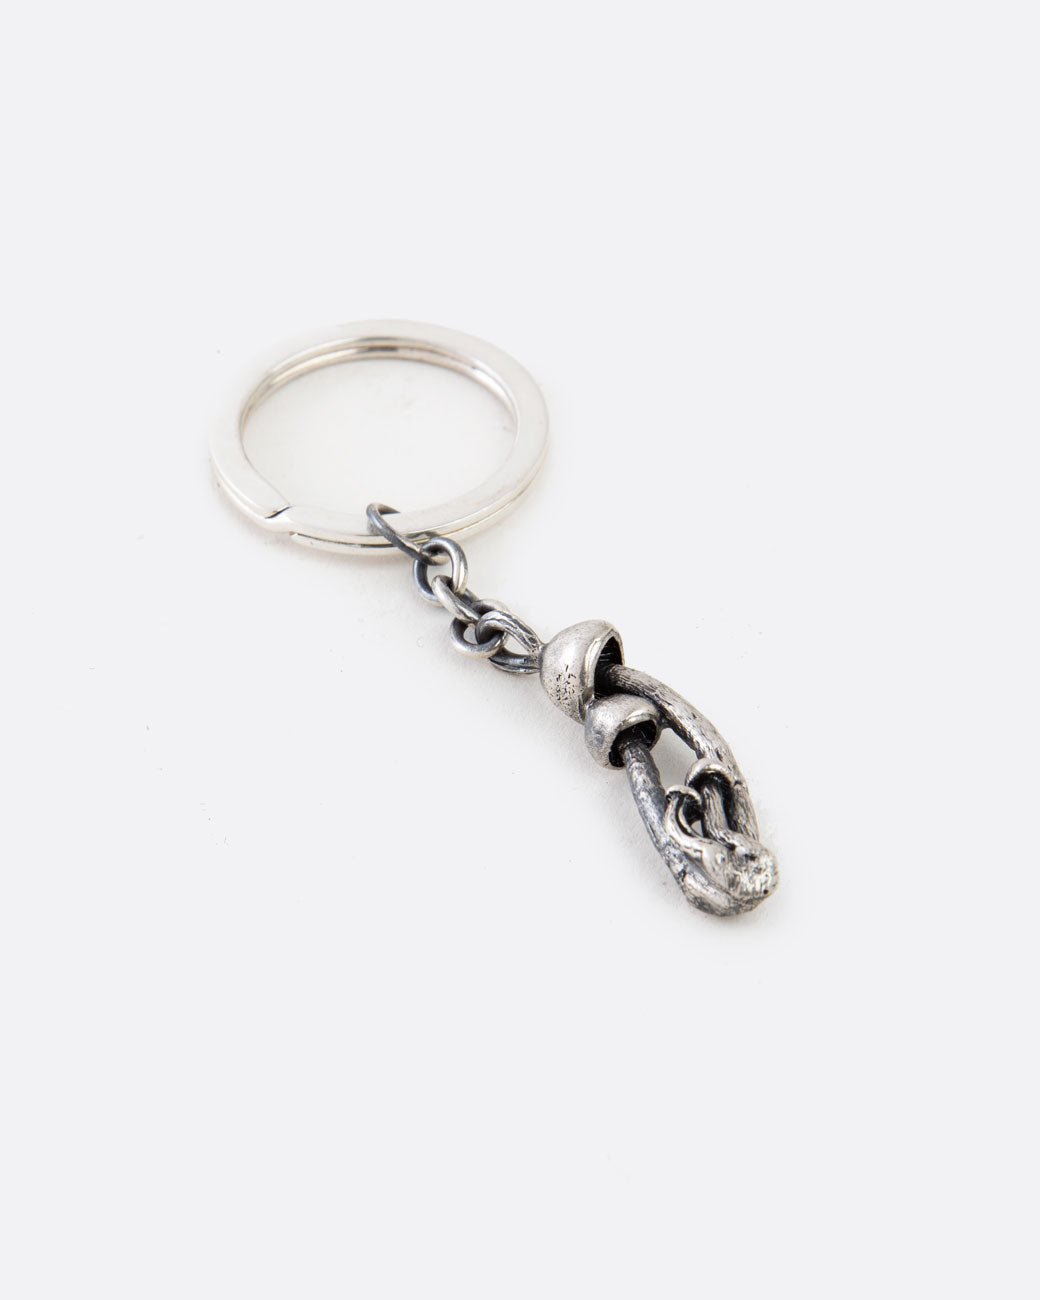 group of mushroom keychain with key on the ring